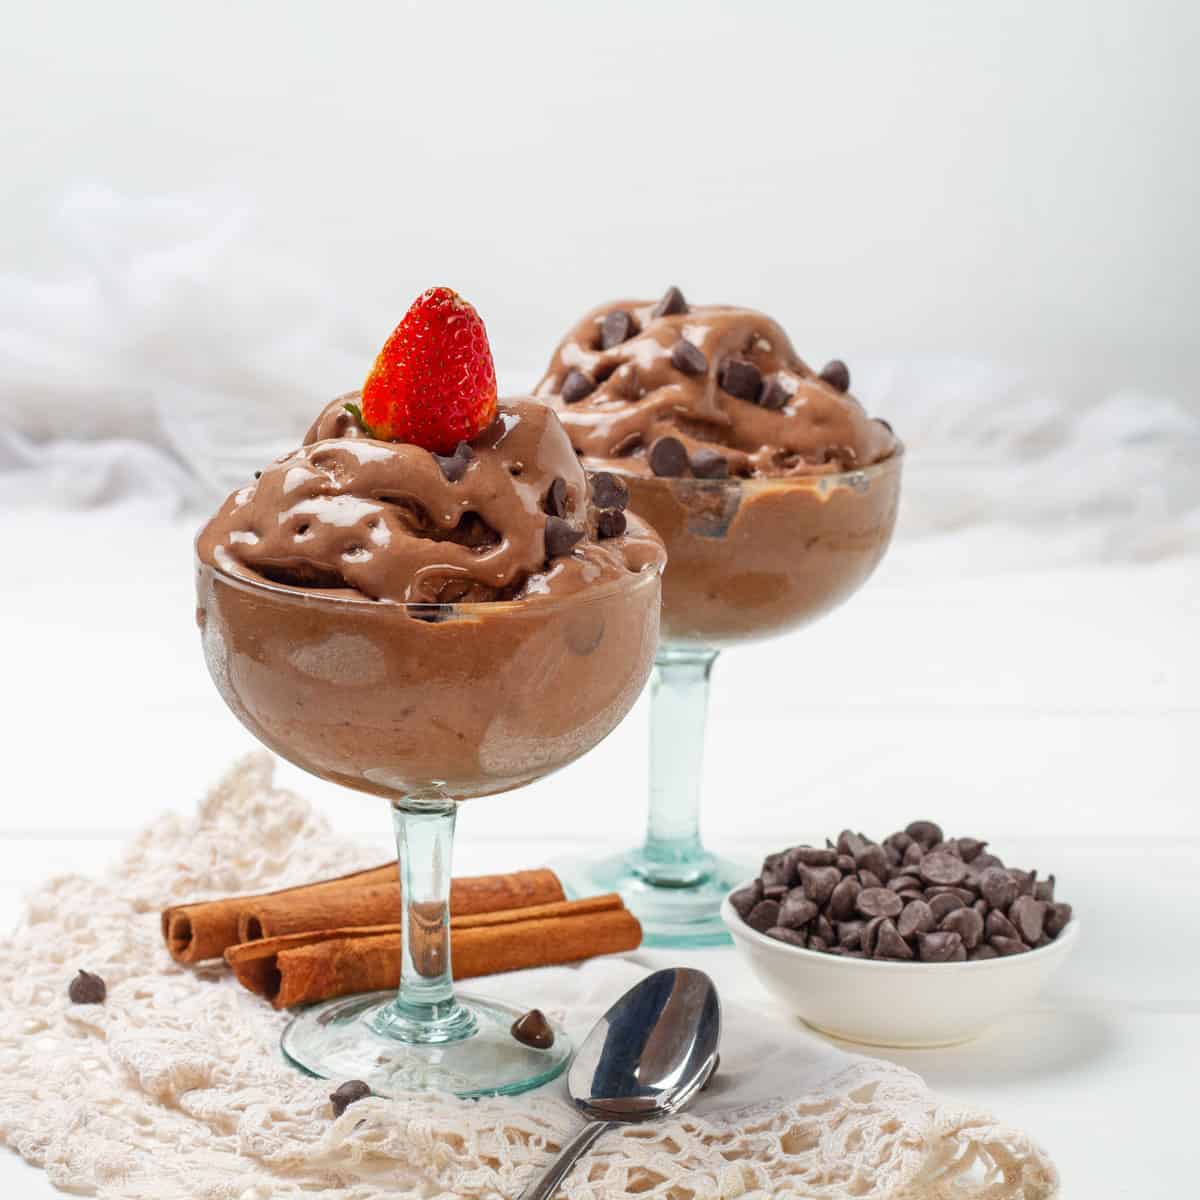 https://drizzlemeskinny.com/wp-content/uploads/2023/12/Chocolate-Banana-Ice-Cream-served-in-2-cups.jpg